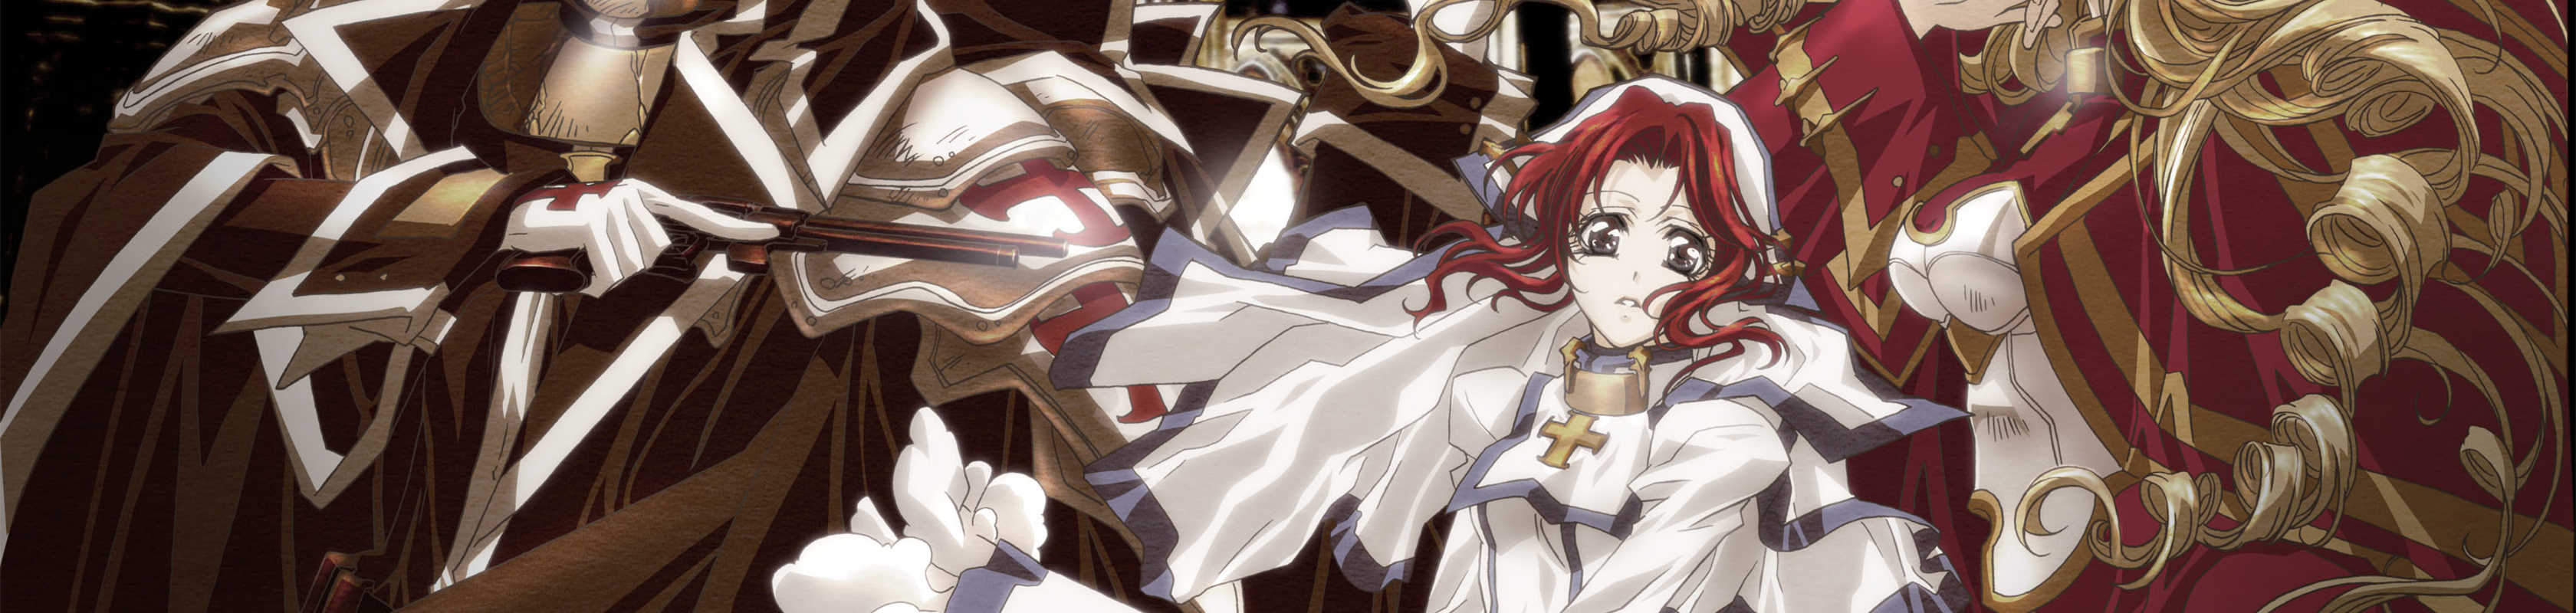 Trinity Blood cover